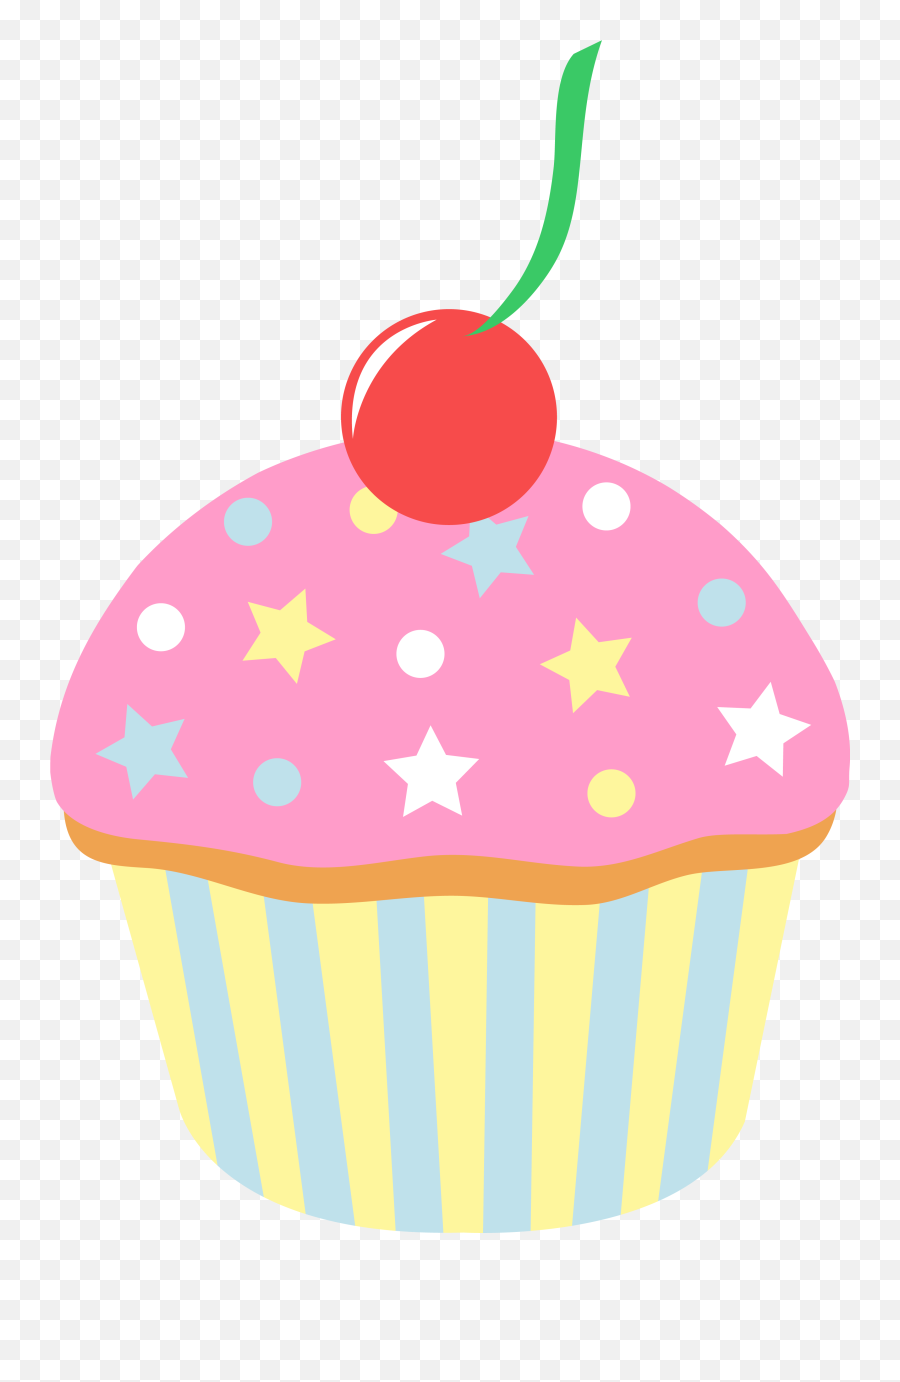 Download Cupcake Png Image Clipart Free Freepngclipart - Cartoon Clipart Cupcake,Cupcake Png